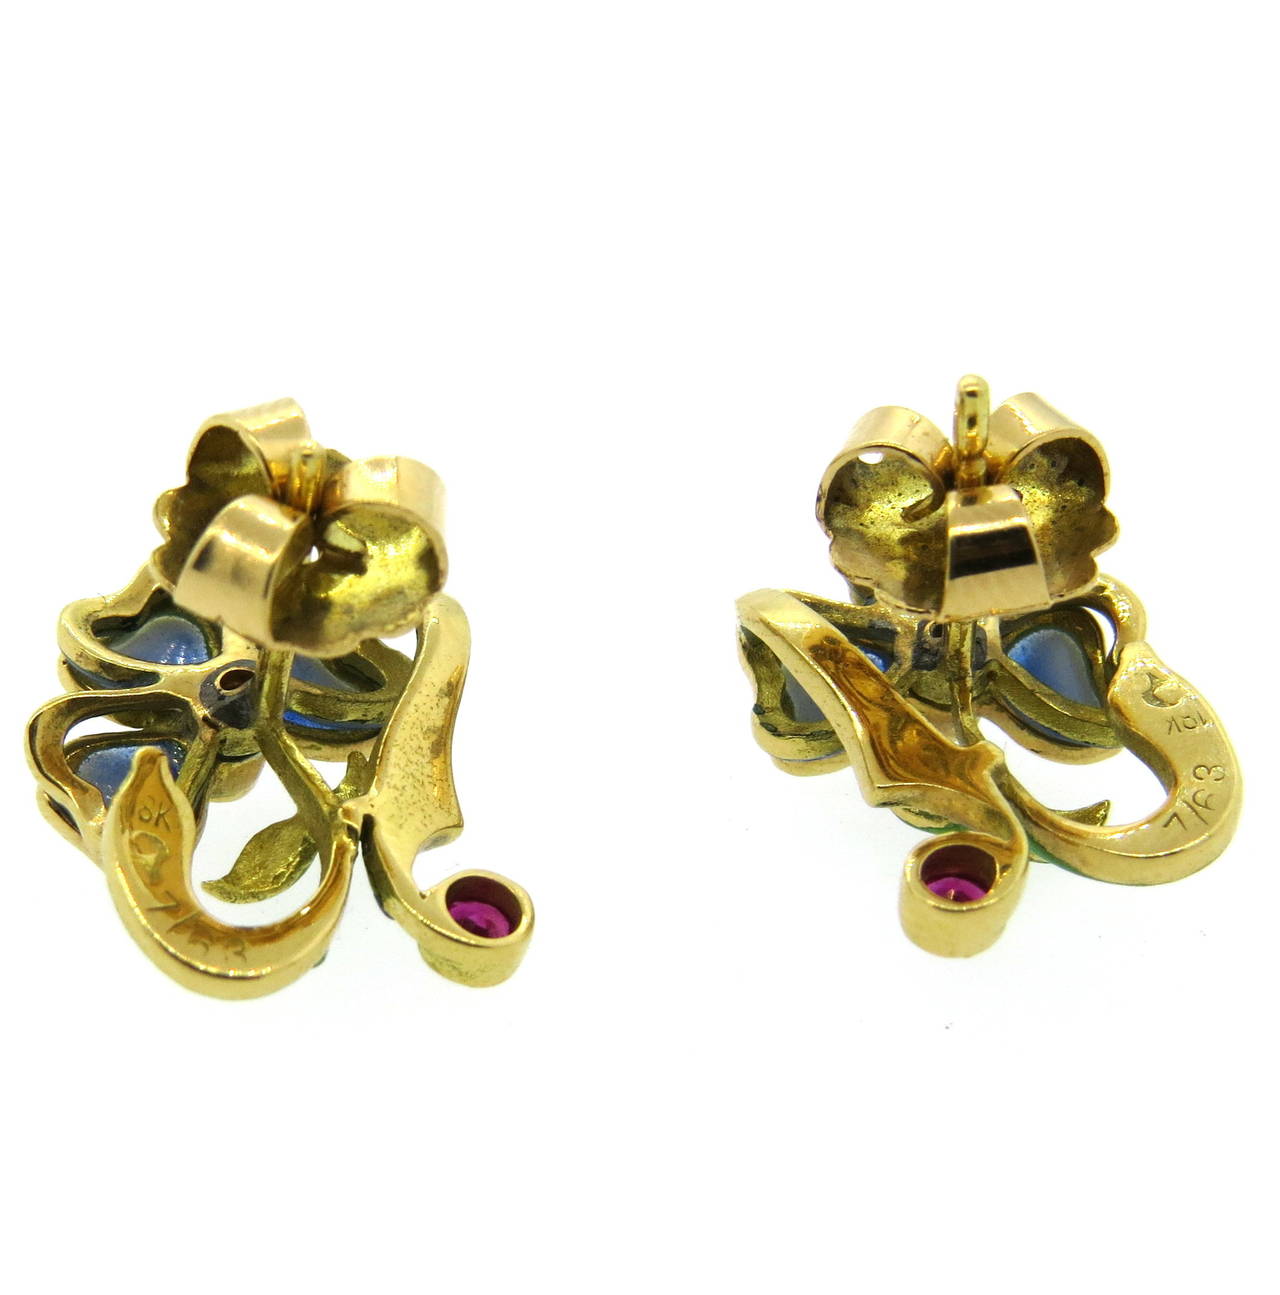 Adorable and delicate 18k gold earrings, crafted in a plique a jour enamel flower design, featuring two diamonds, approximately 0.06ct each and two rubies. Earrings measure 18mm x 15mm. Weight - 7.7 grams